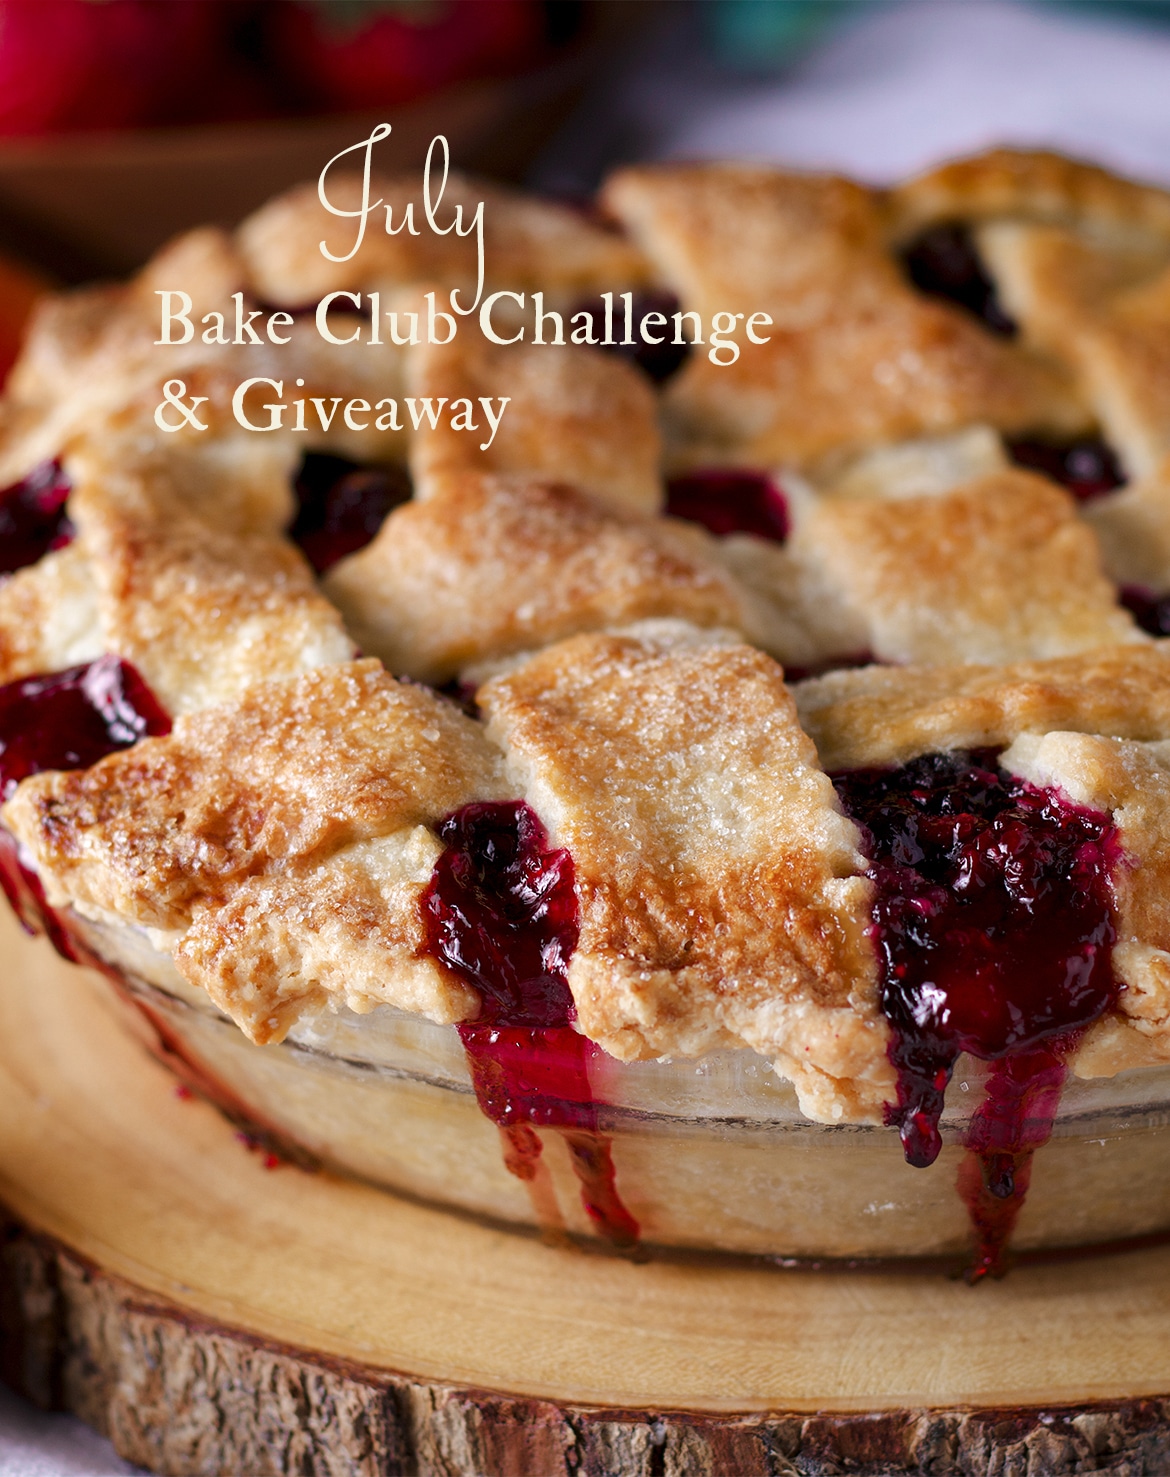 The July Bake Club Baking Challenge is a Mixed Berry and Plum Pie